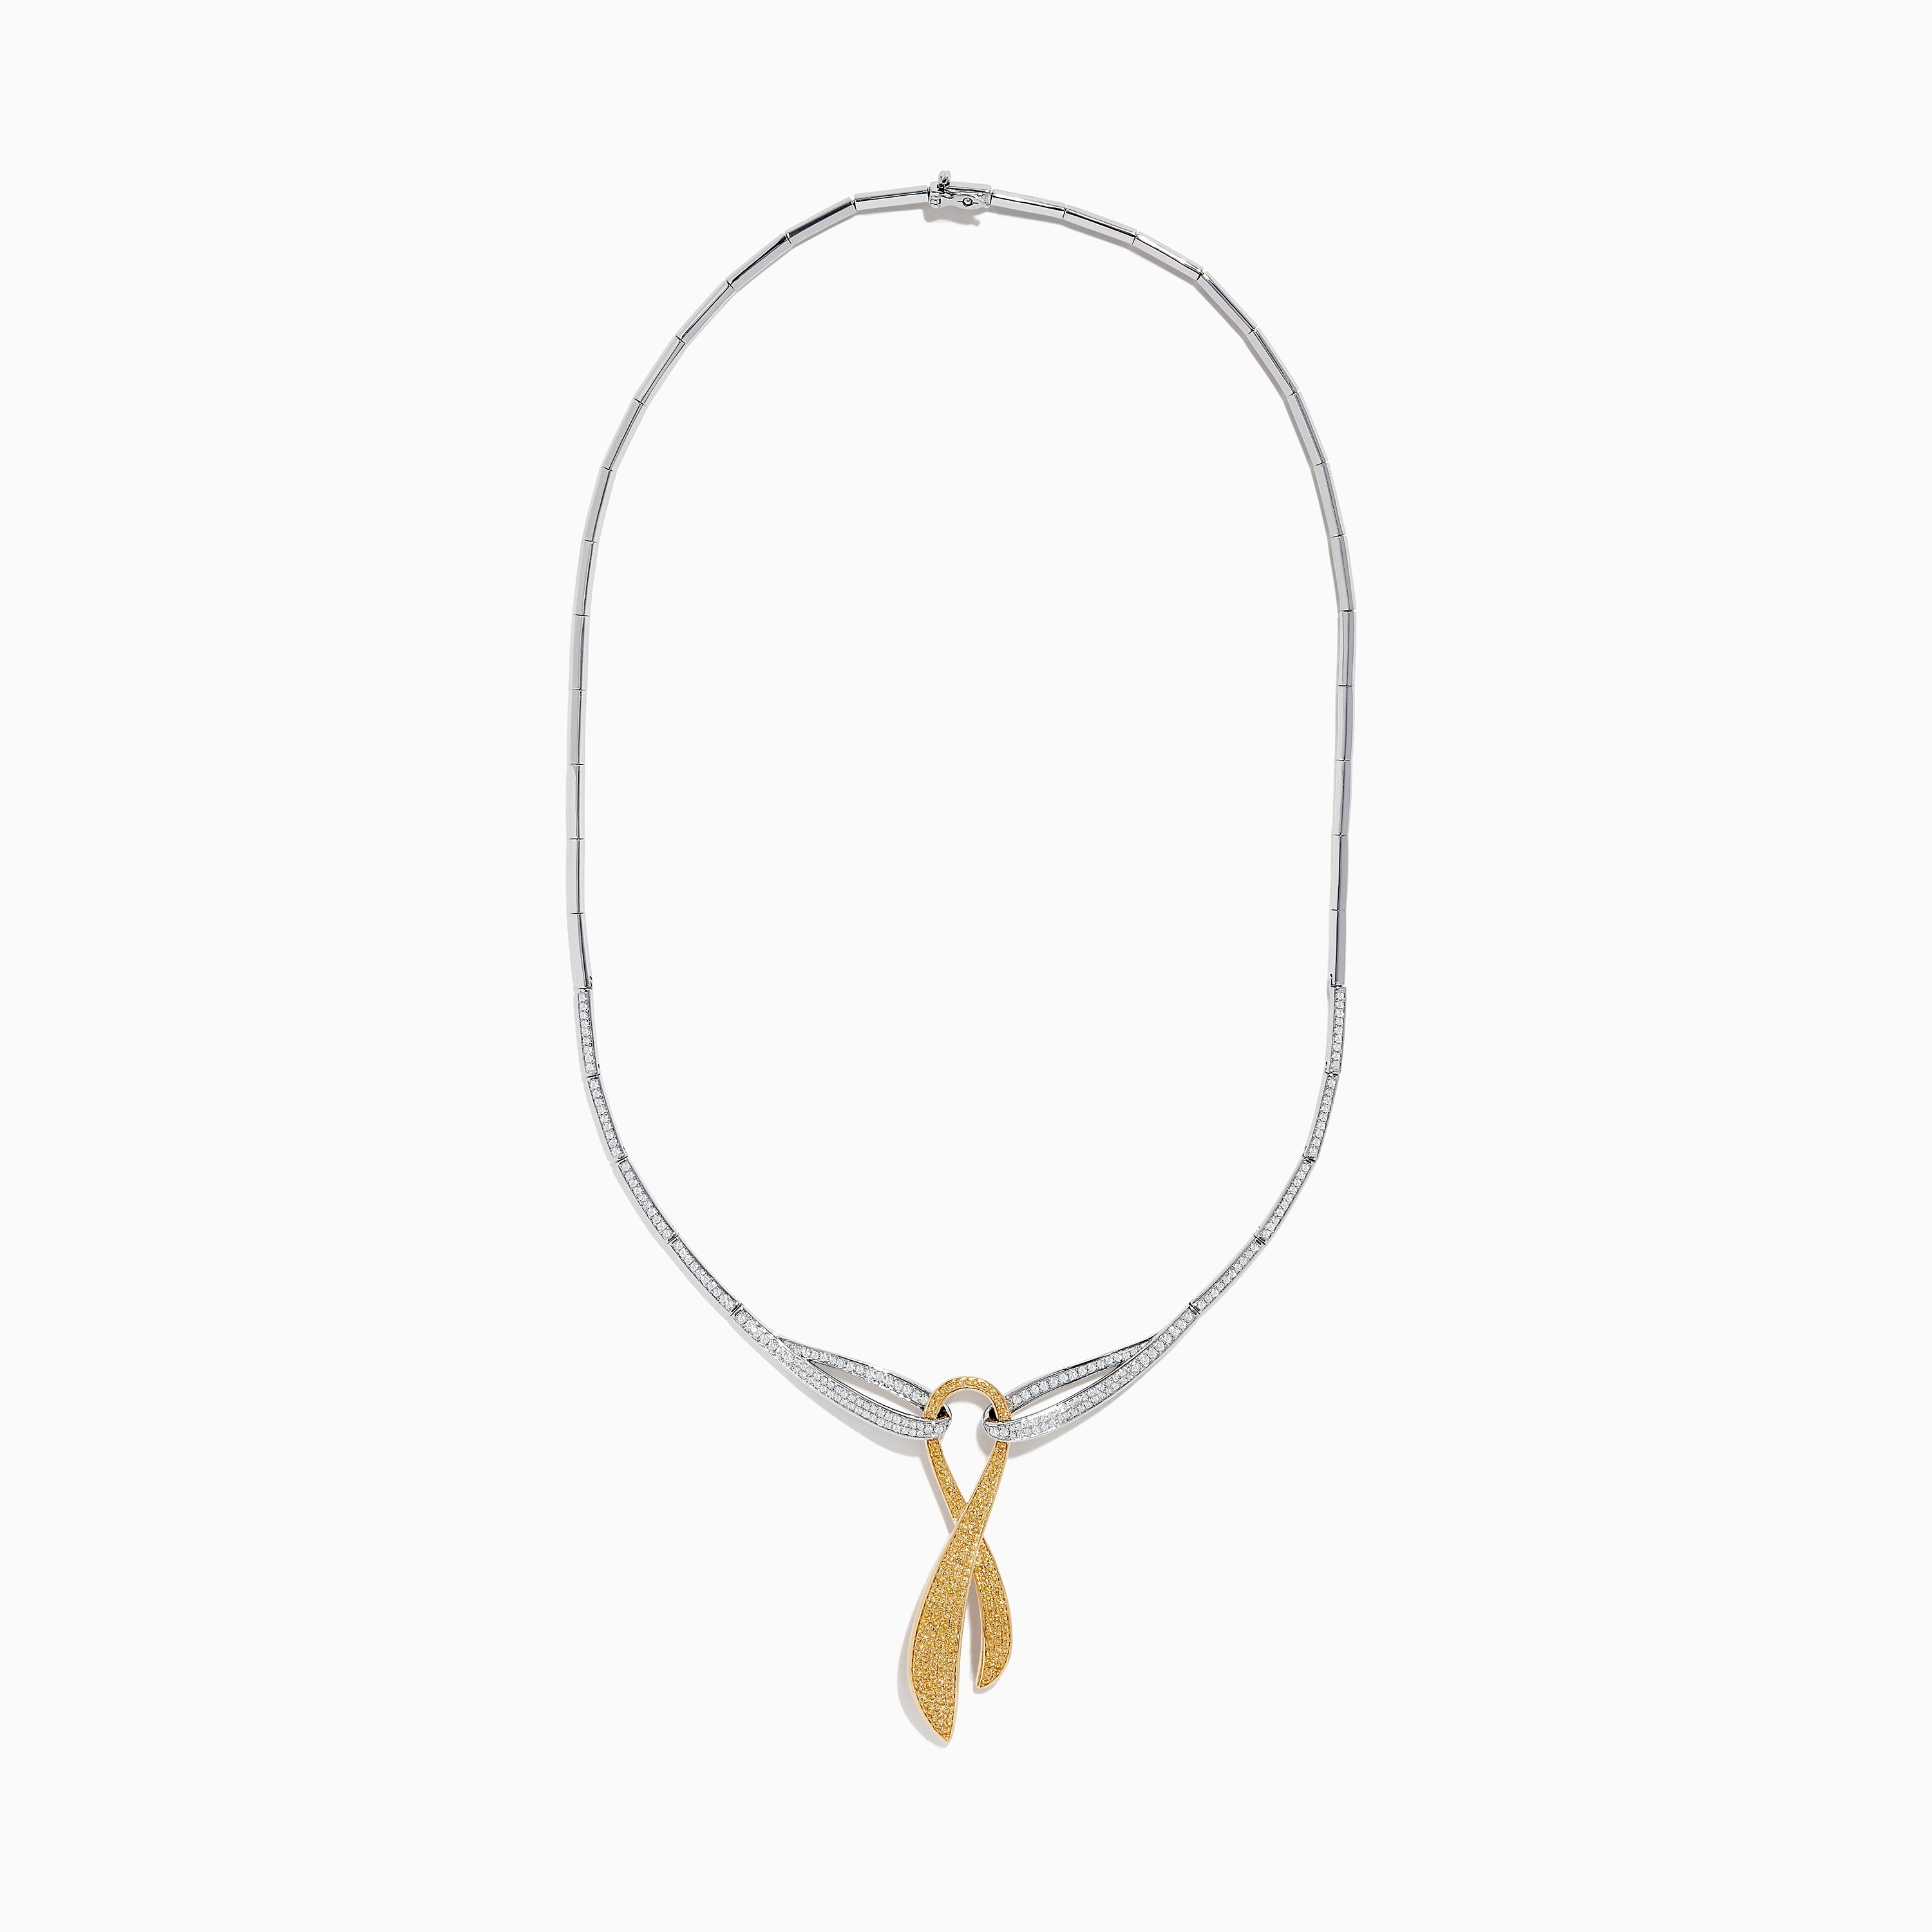 Effy Canare 14K Two-Tone Gold Diamond Cancer Awareness Necklace